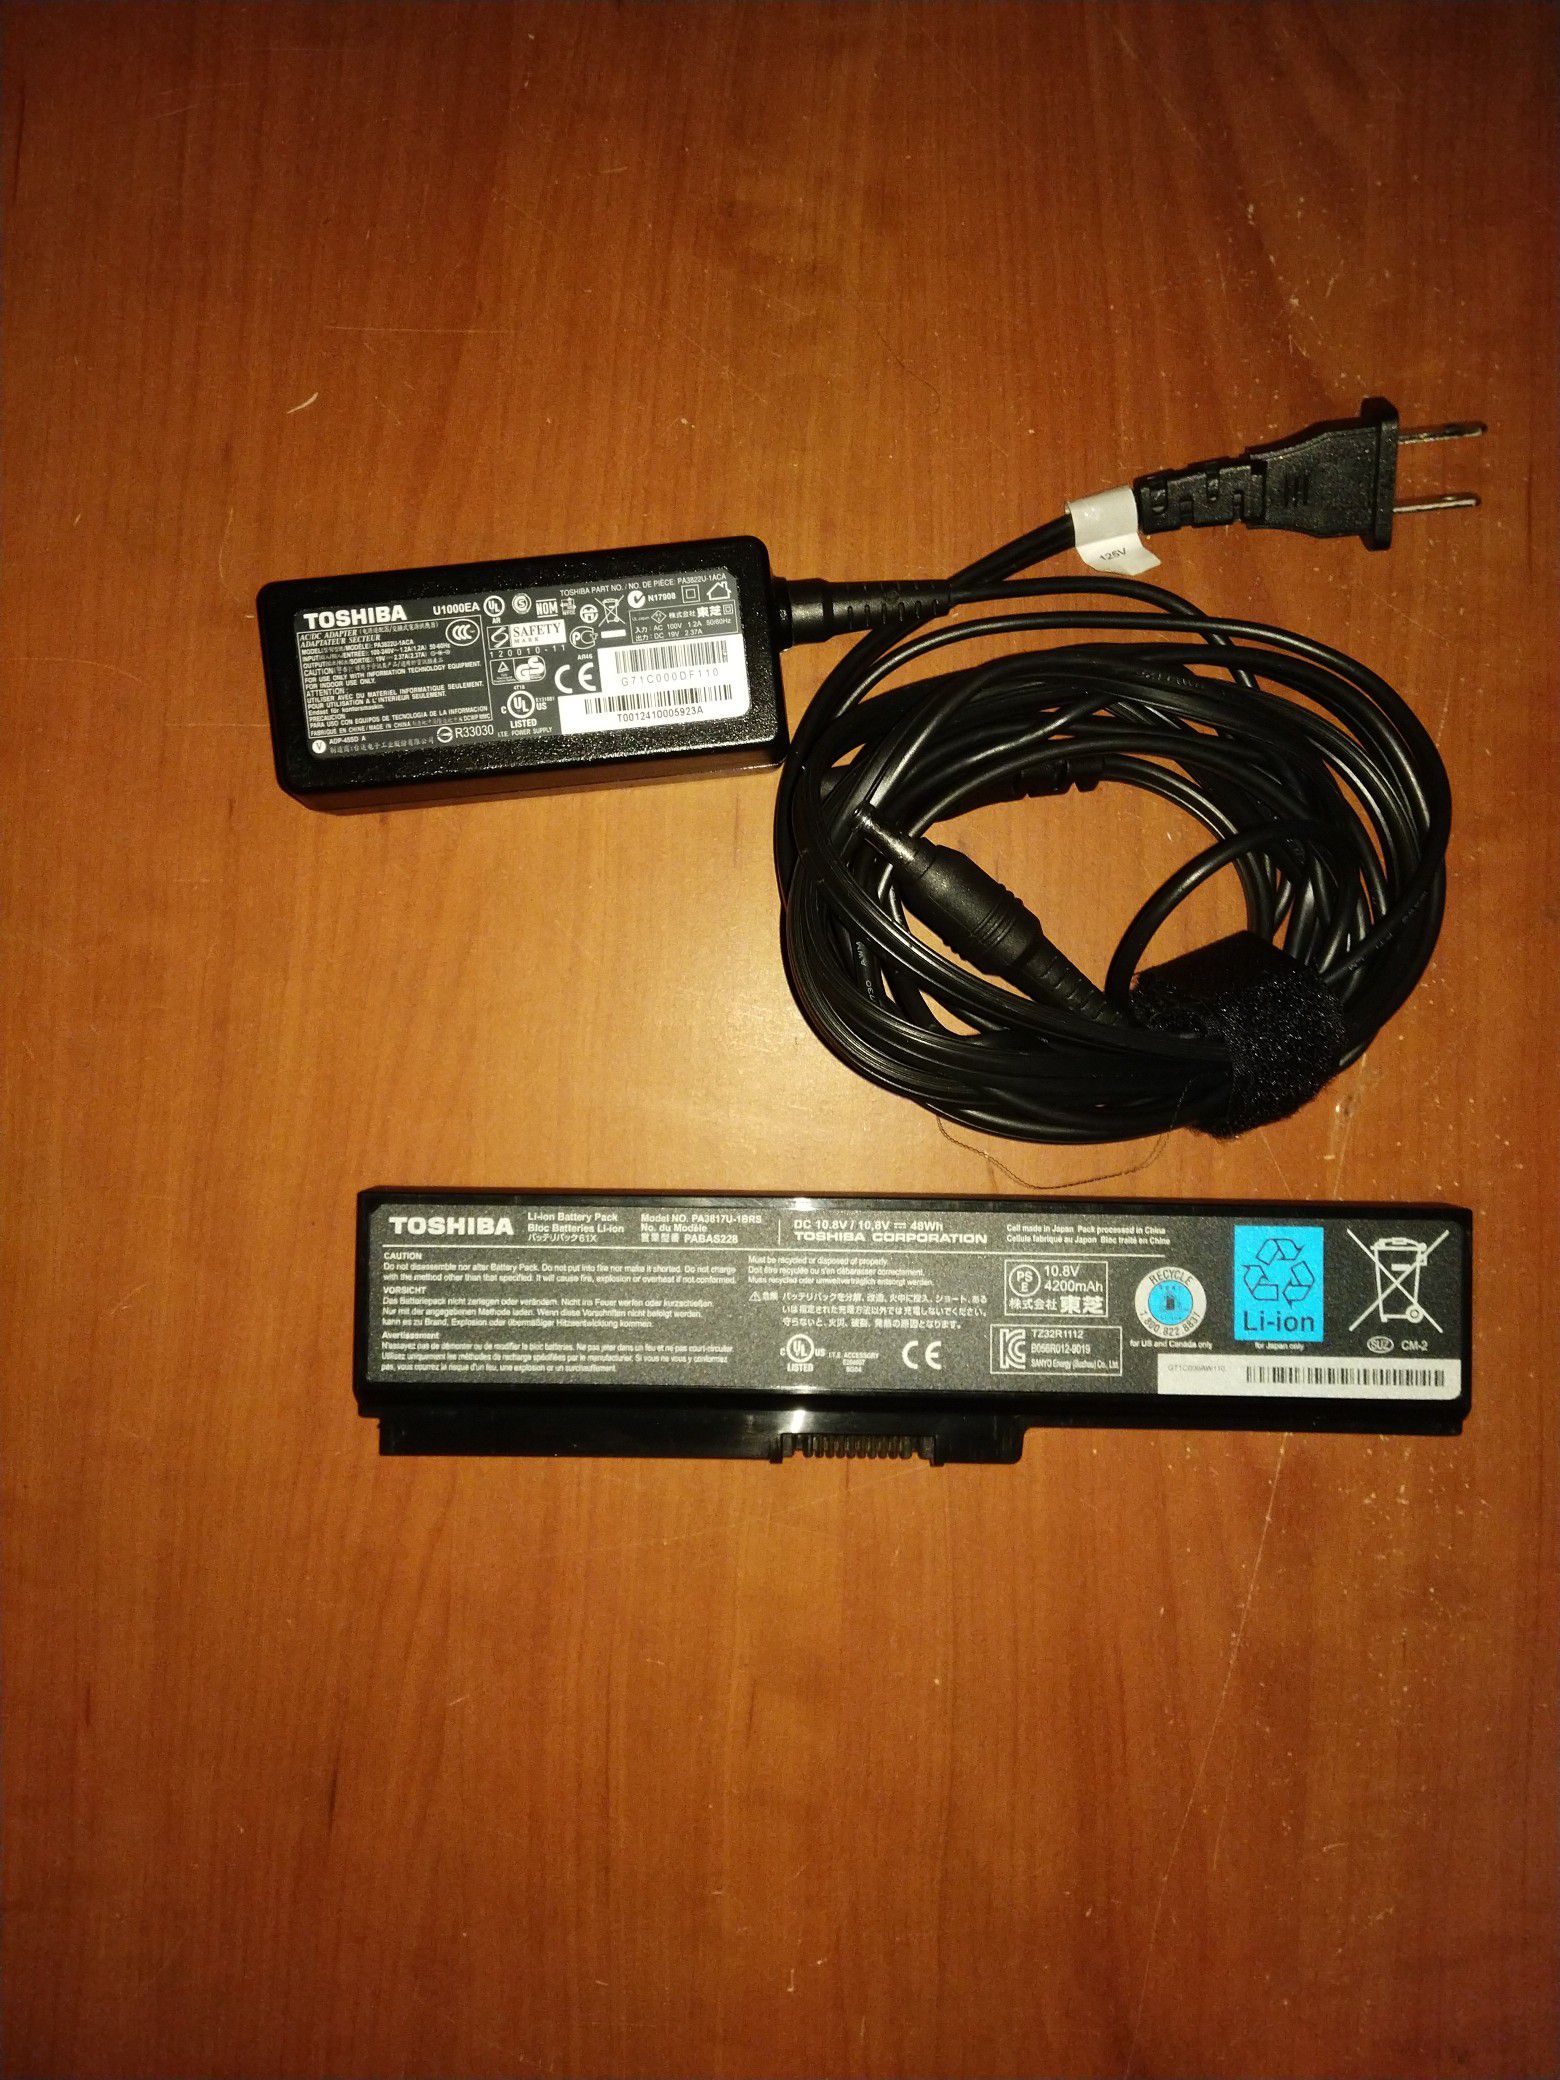 Toshiba Satellite Laptop Lithium - Ion Battery and Charger